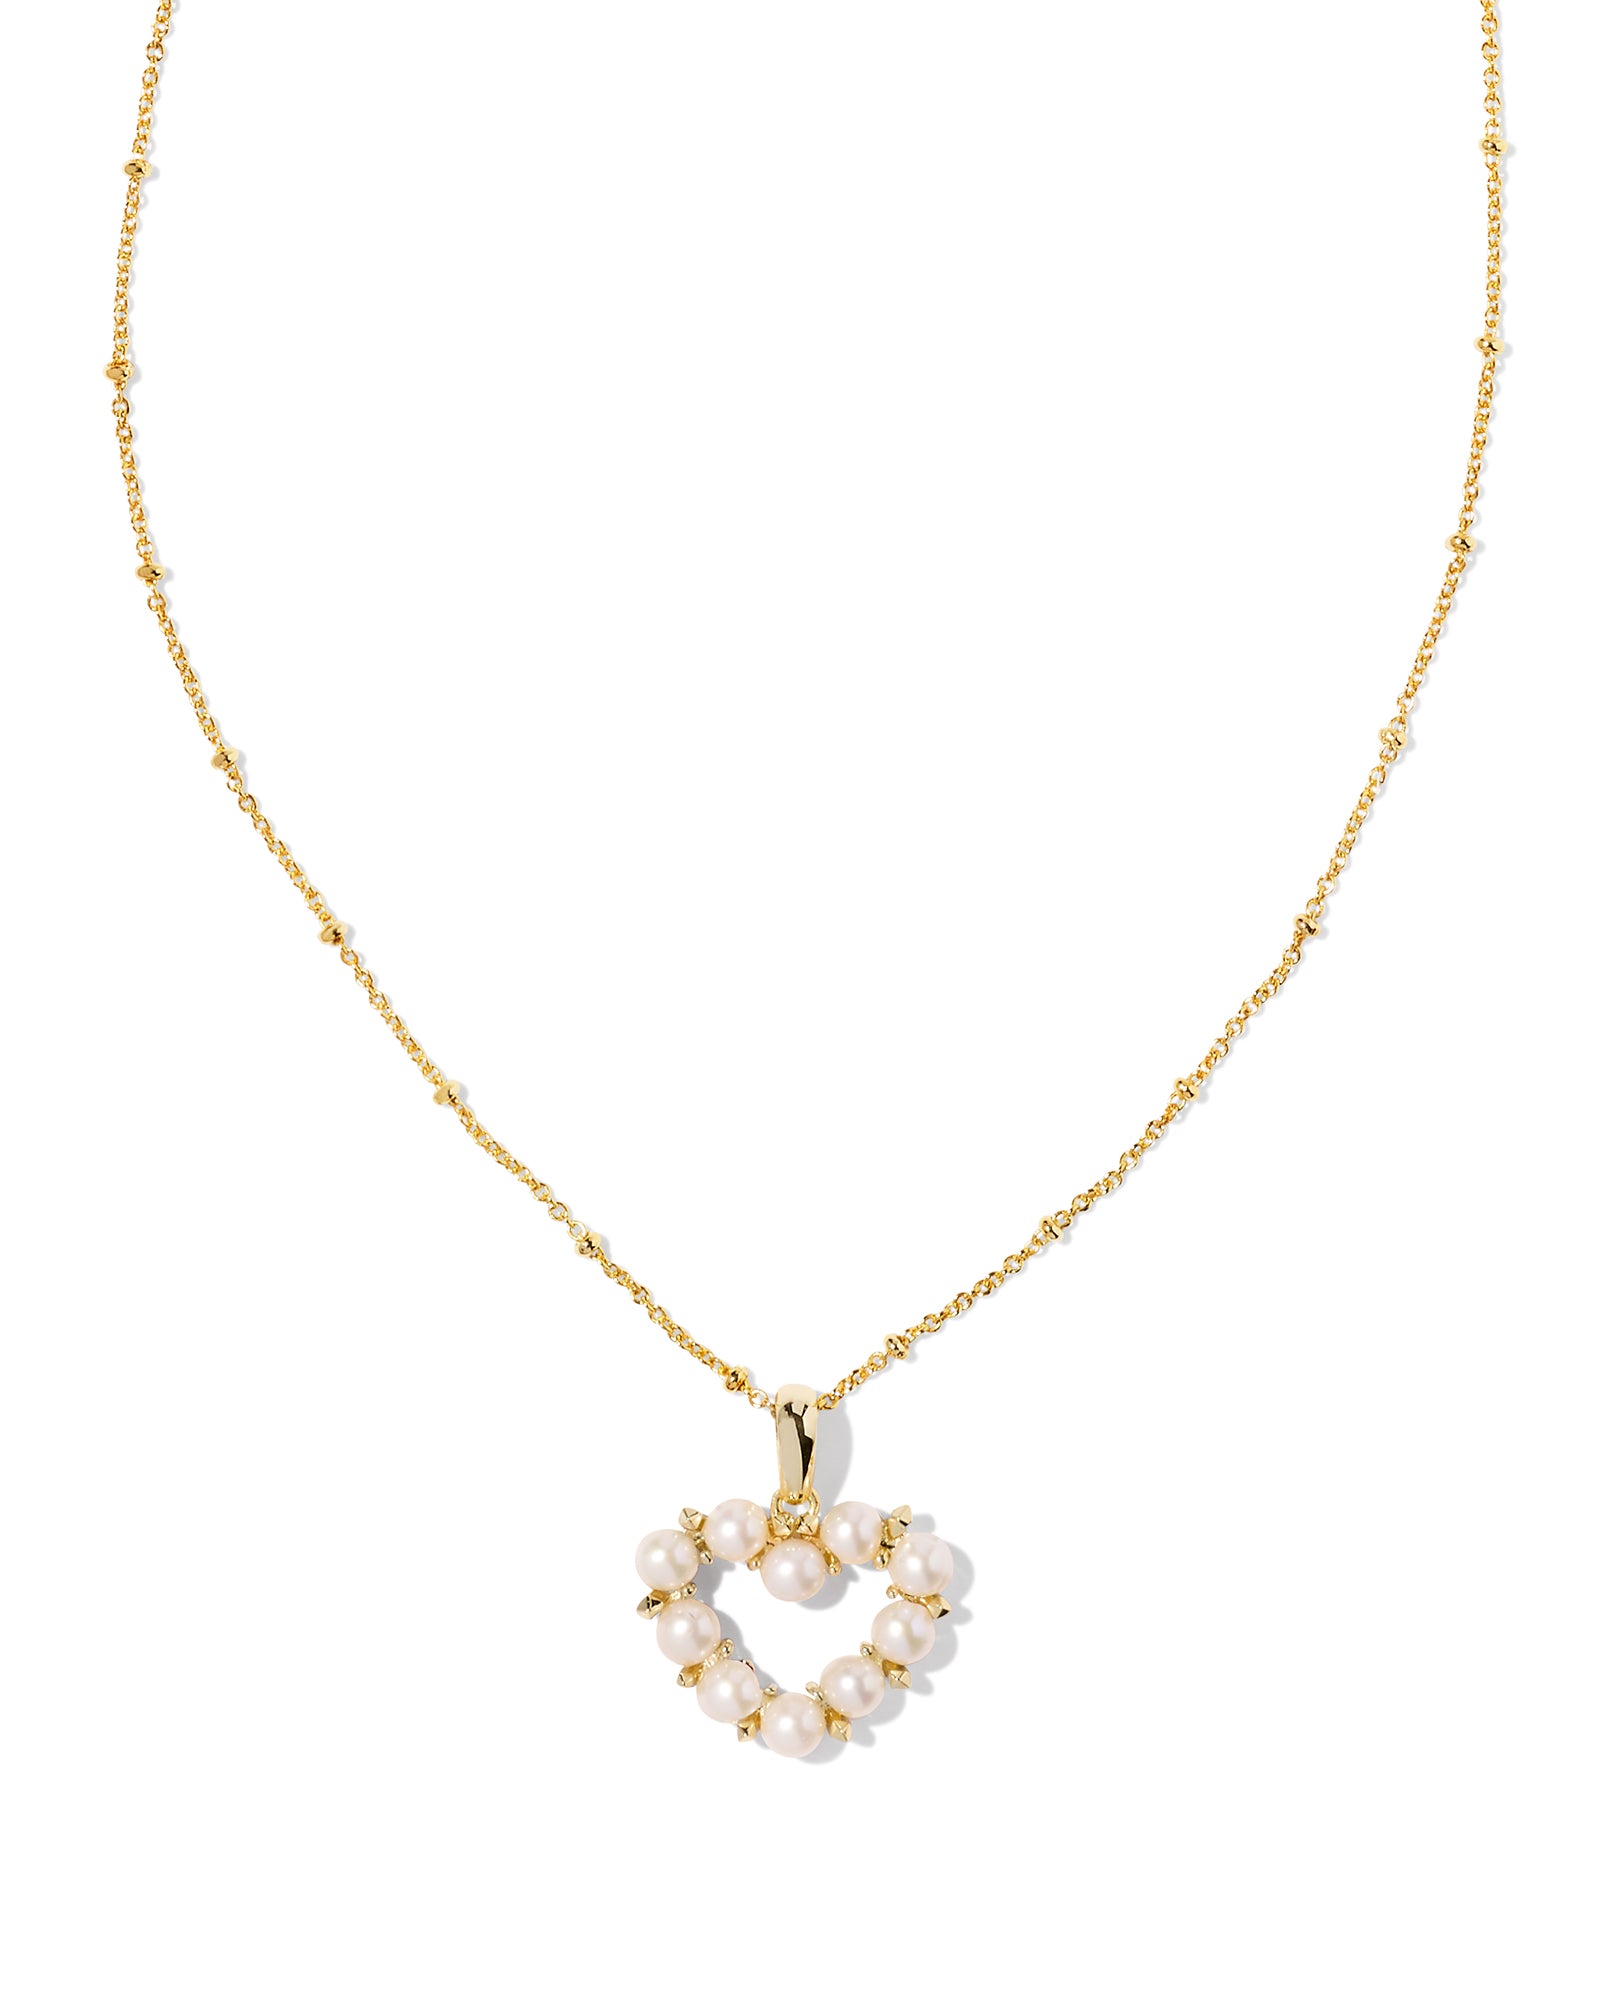 Kendra Scott Ashton Heart Pendant Necklace in White Pearl and Gold Plated